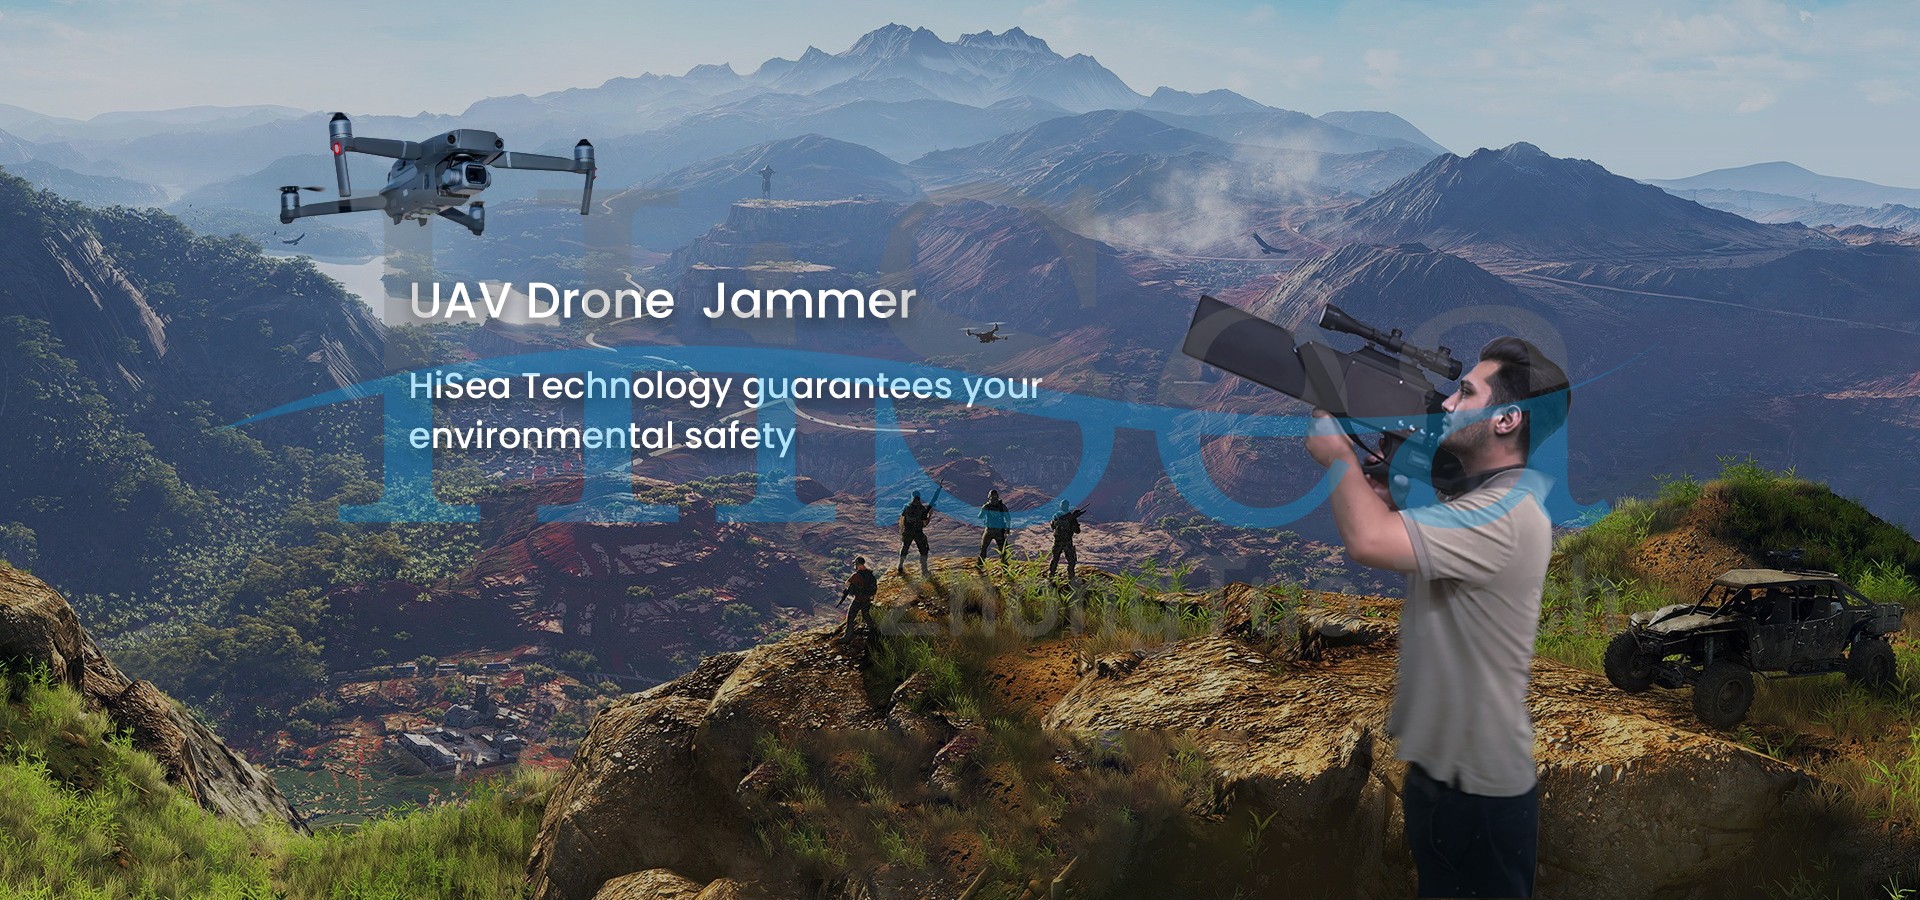 Worried about drone invasion? The HiSea Jammer provides Anti-drone solutions. 